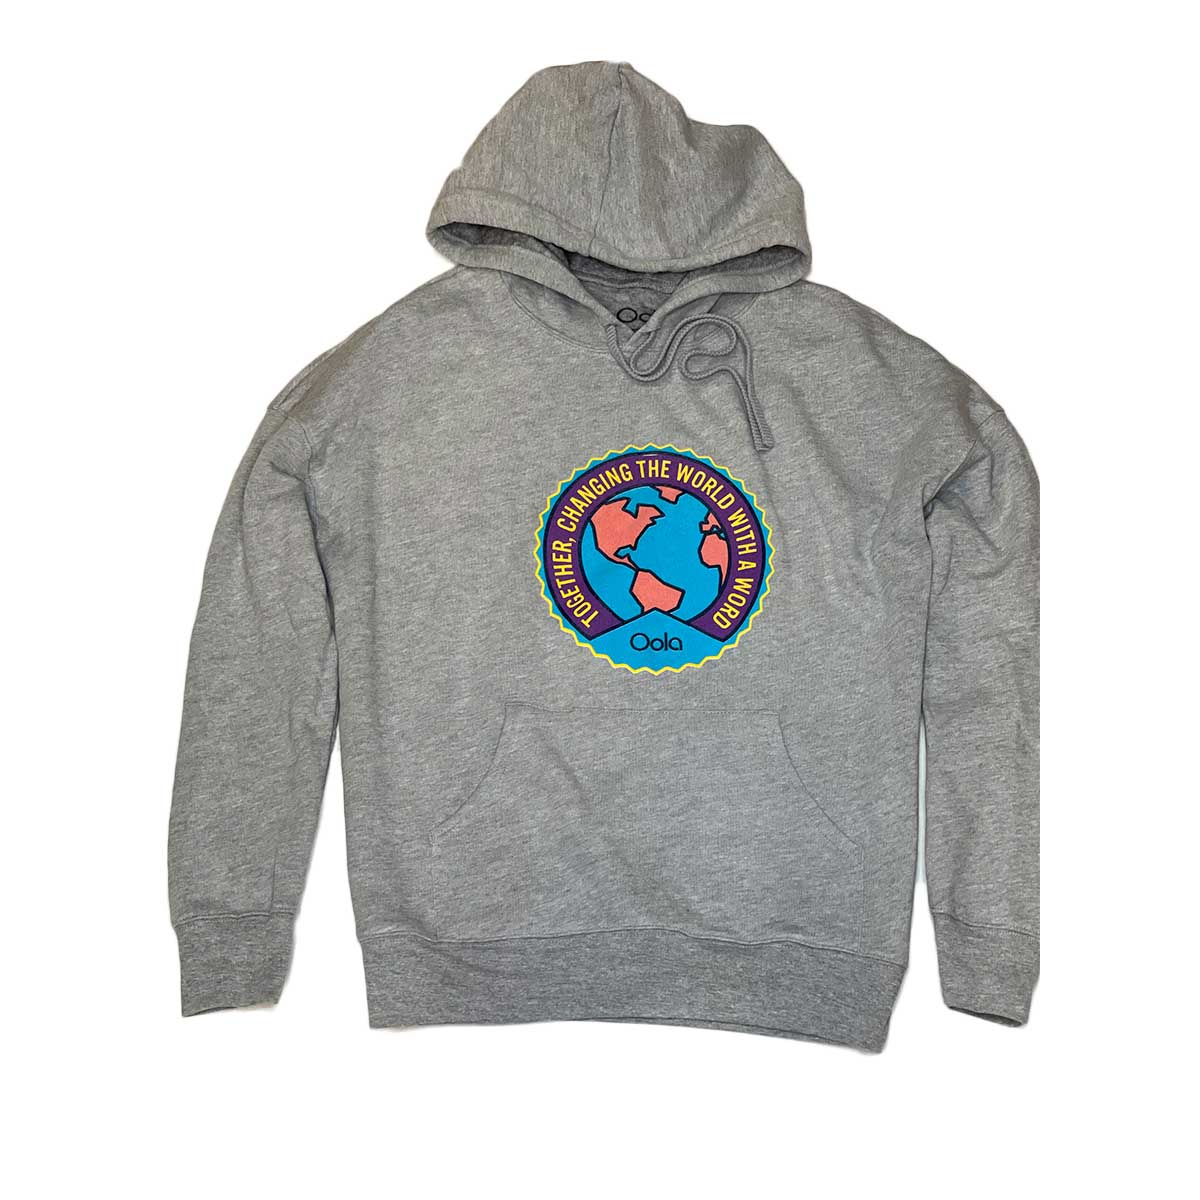 Grey Unisex TOGETHER CHANGING THE WORLD Hoodie